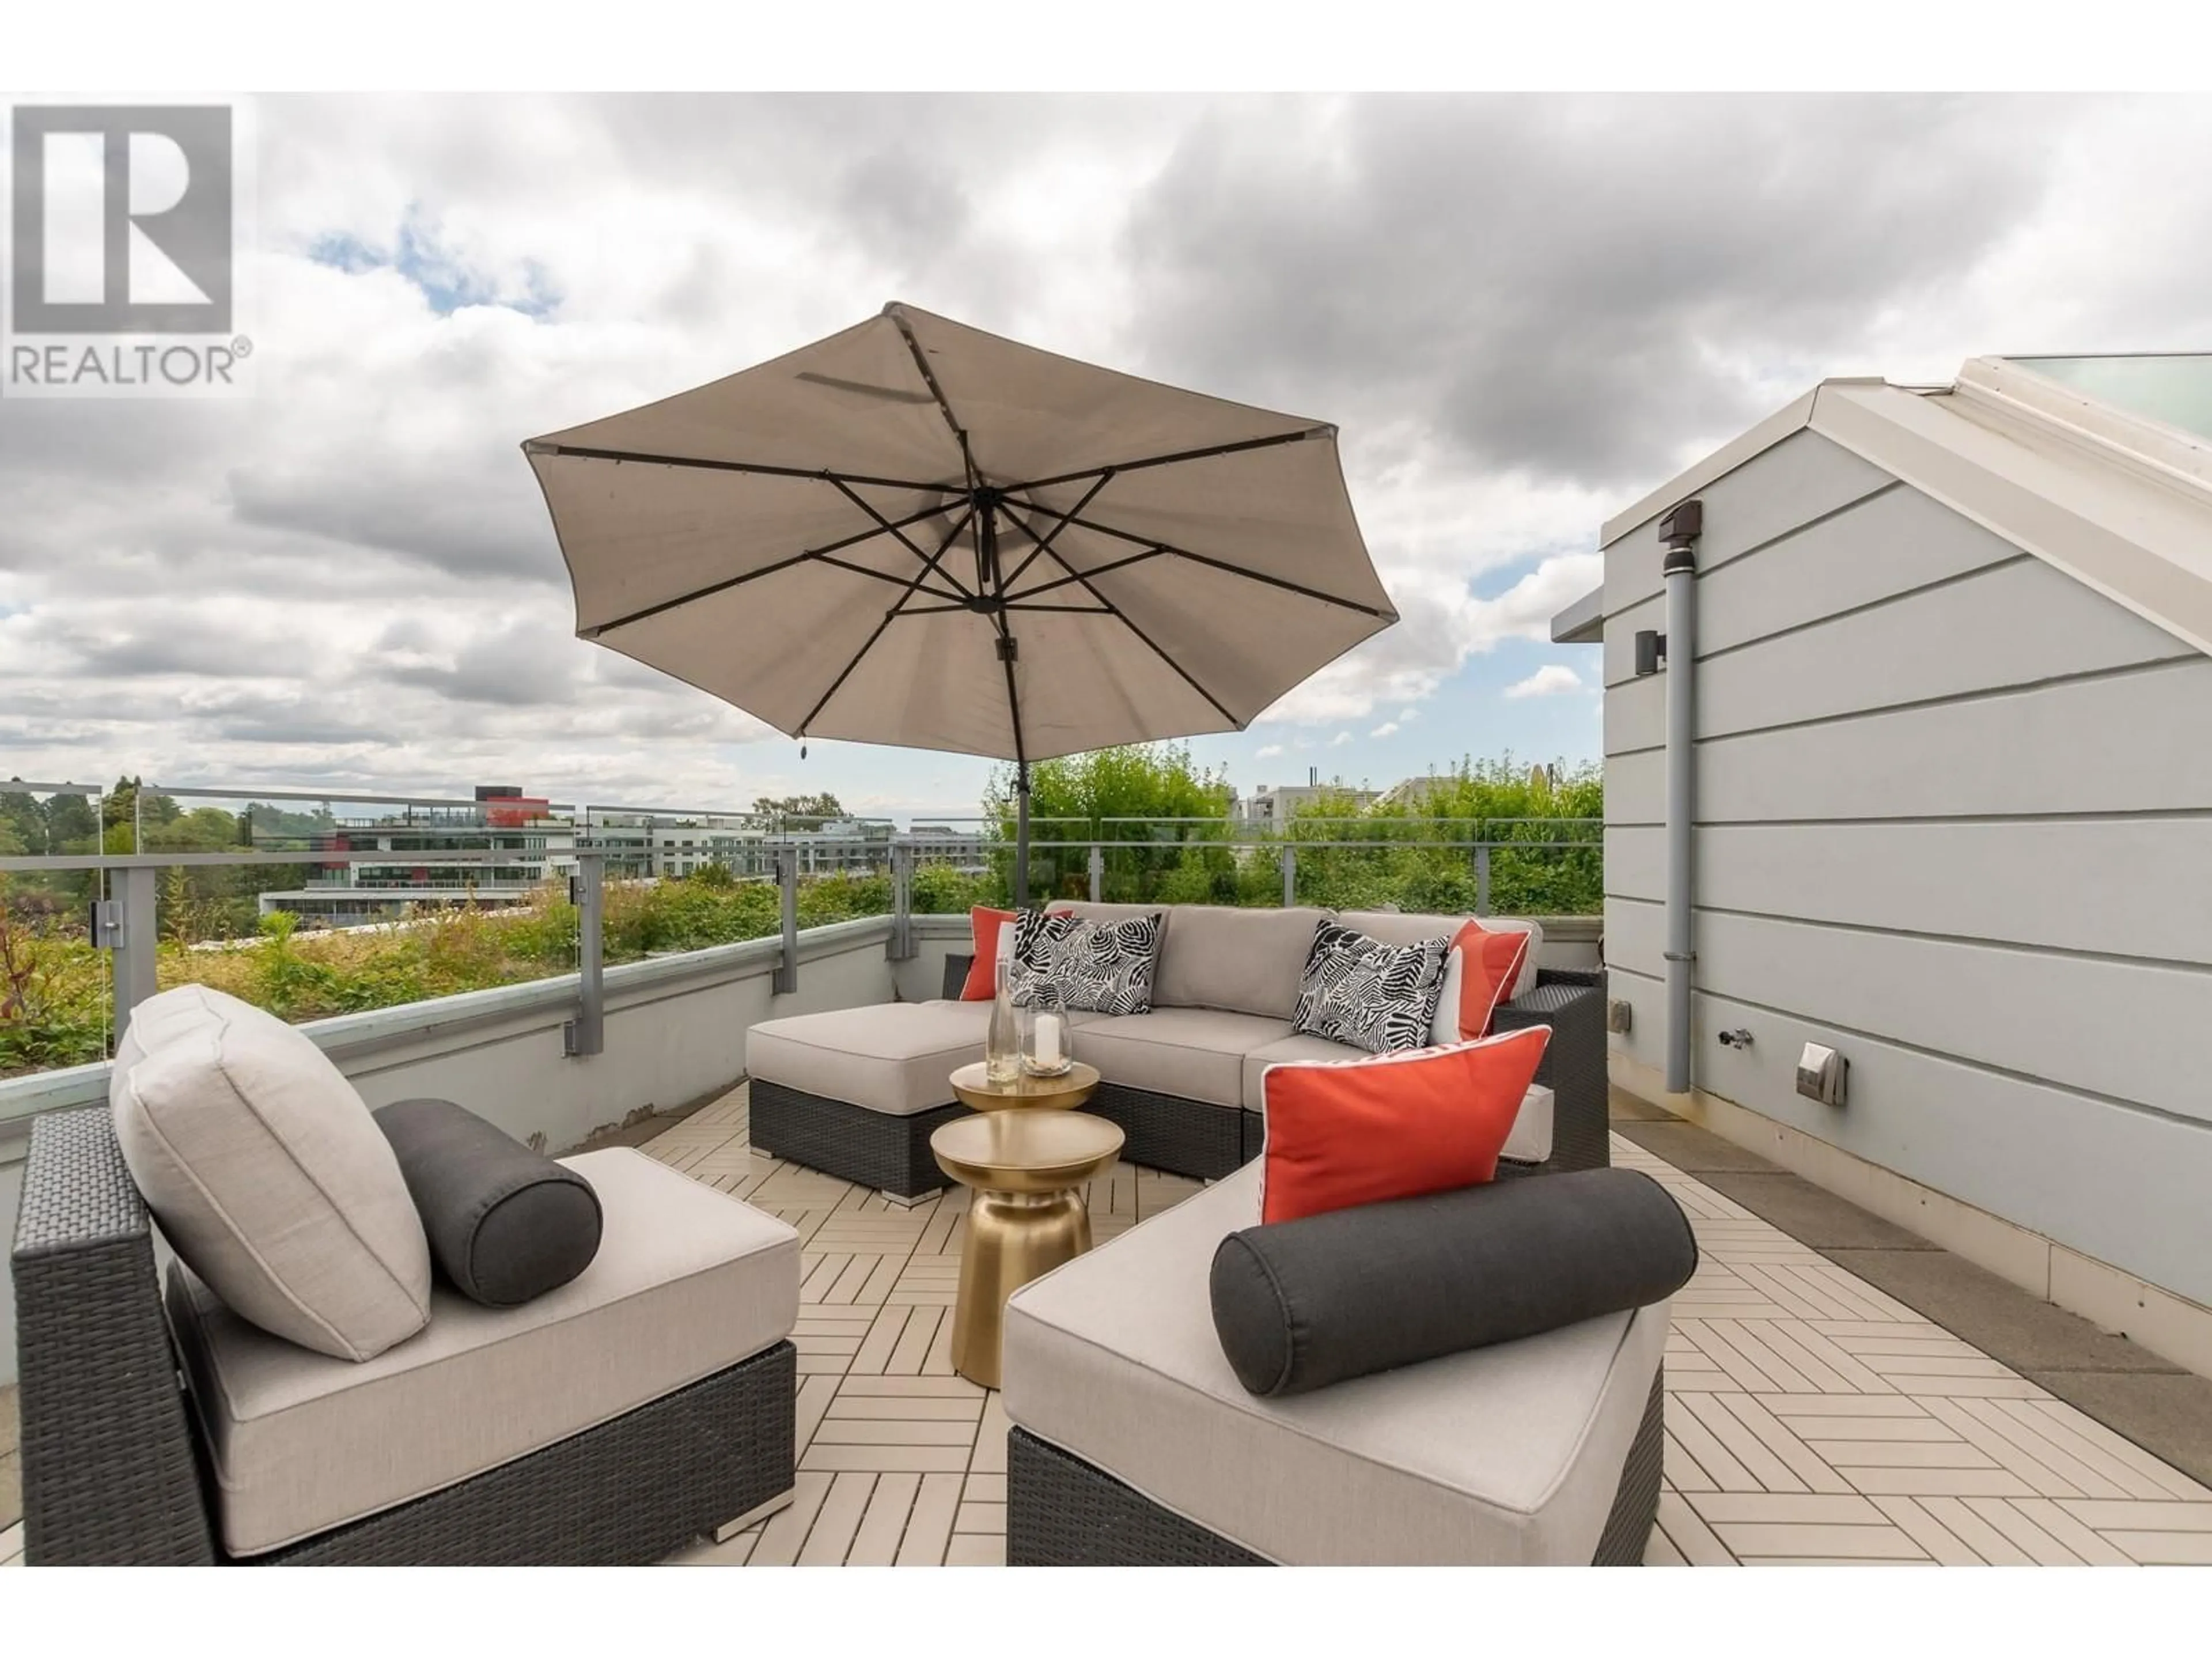 Patio for 603 5033 CAMBIE STREET, Vancouver British Columbia V5Z0H6